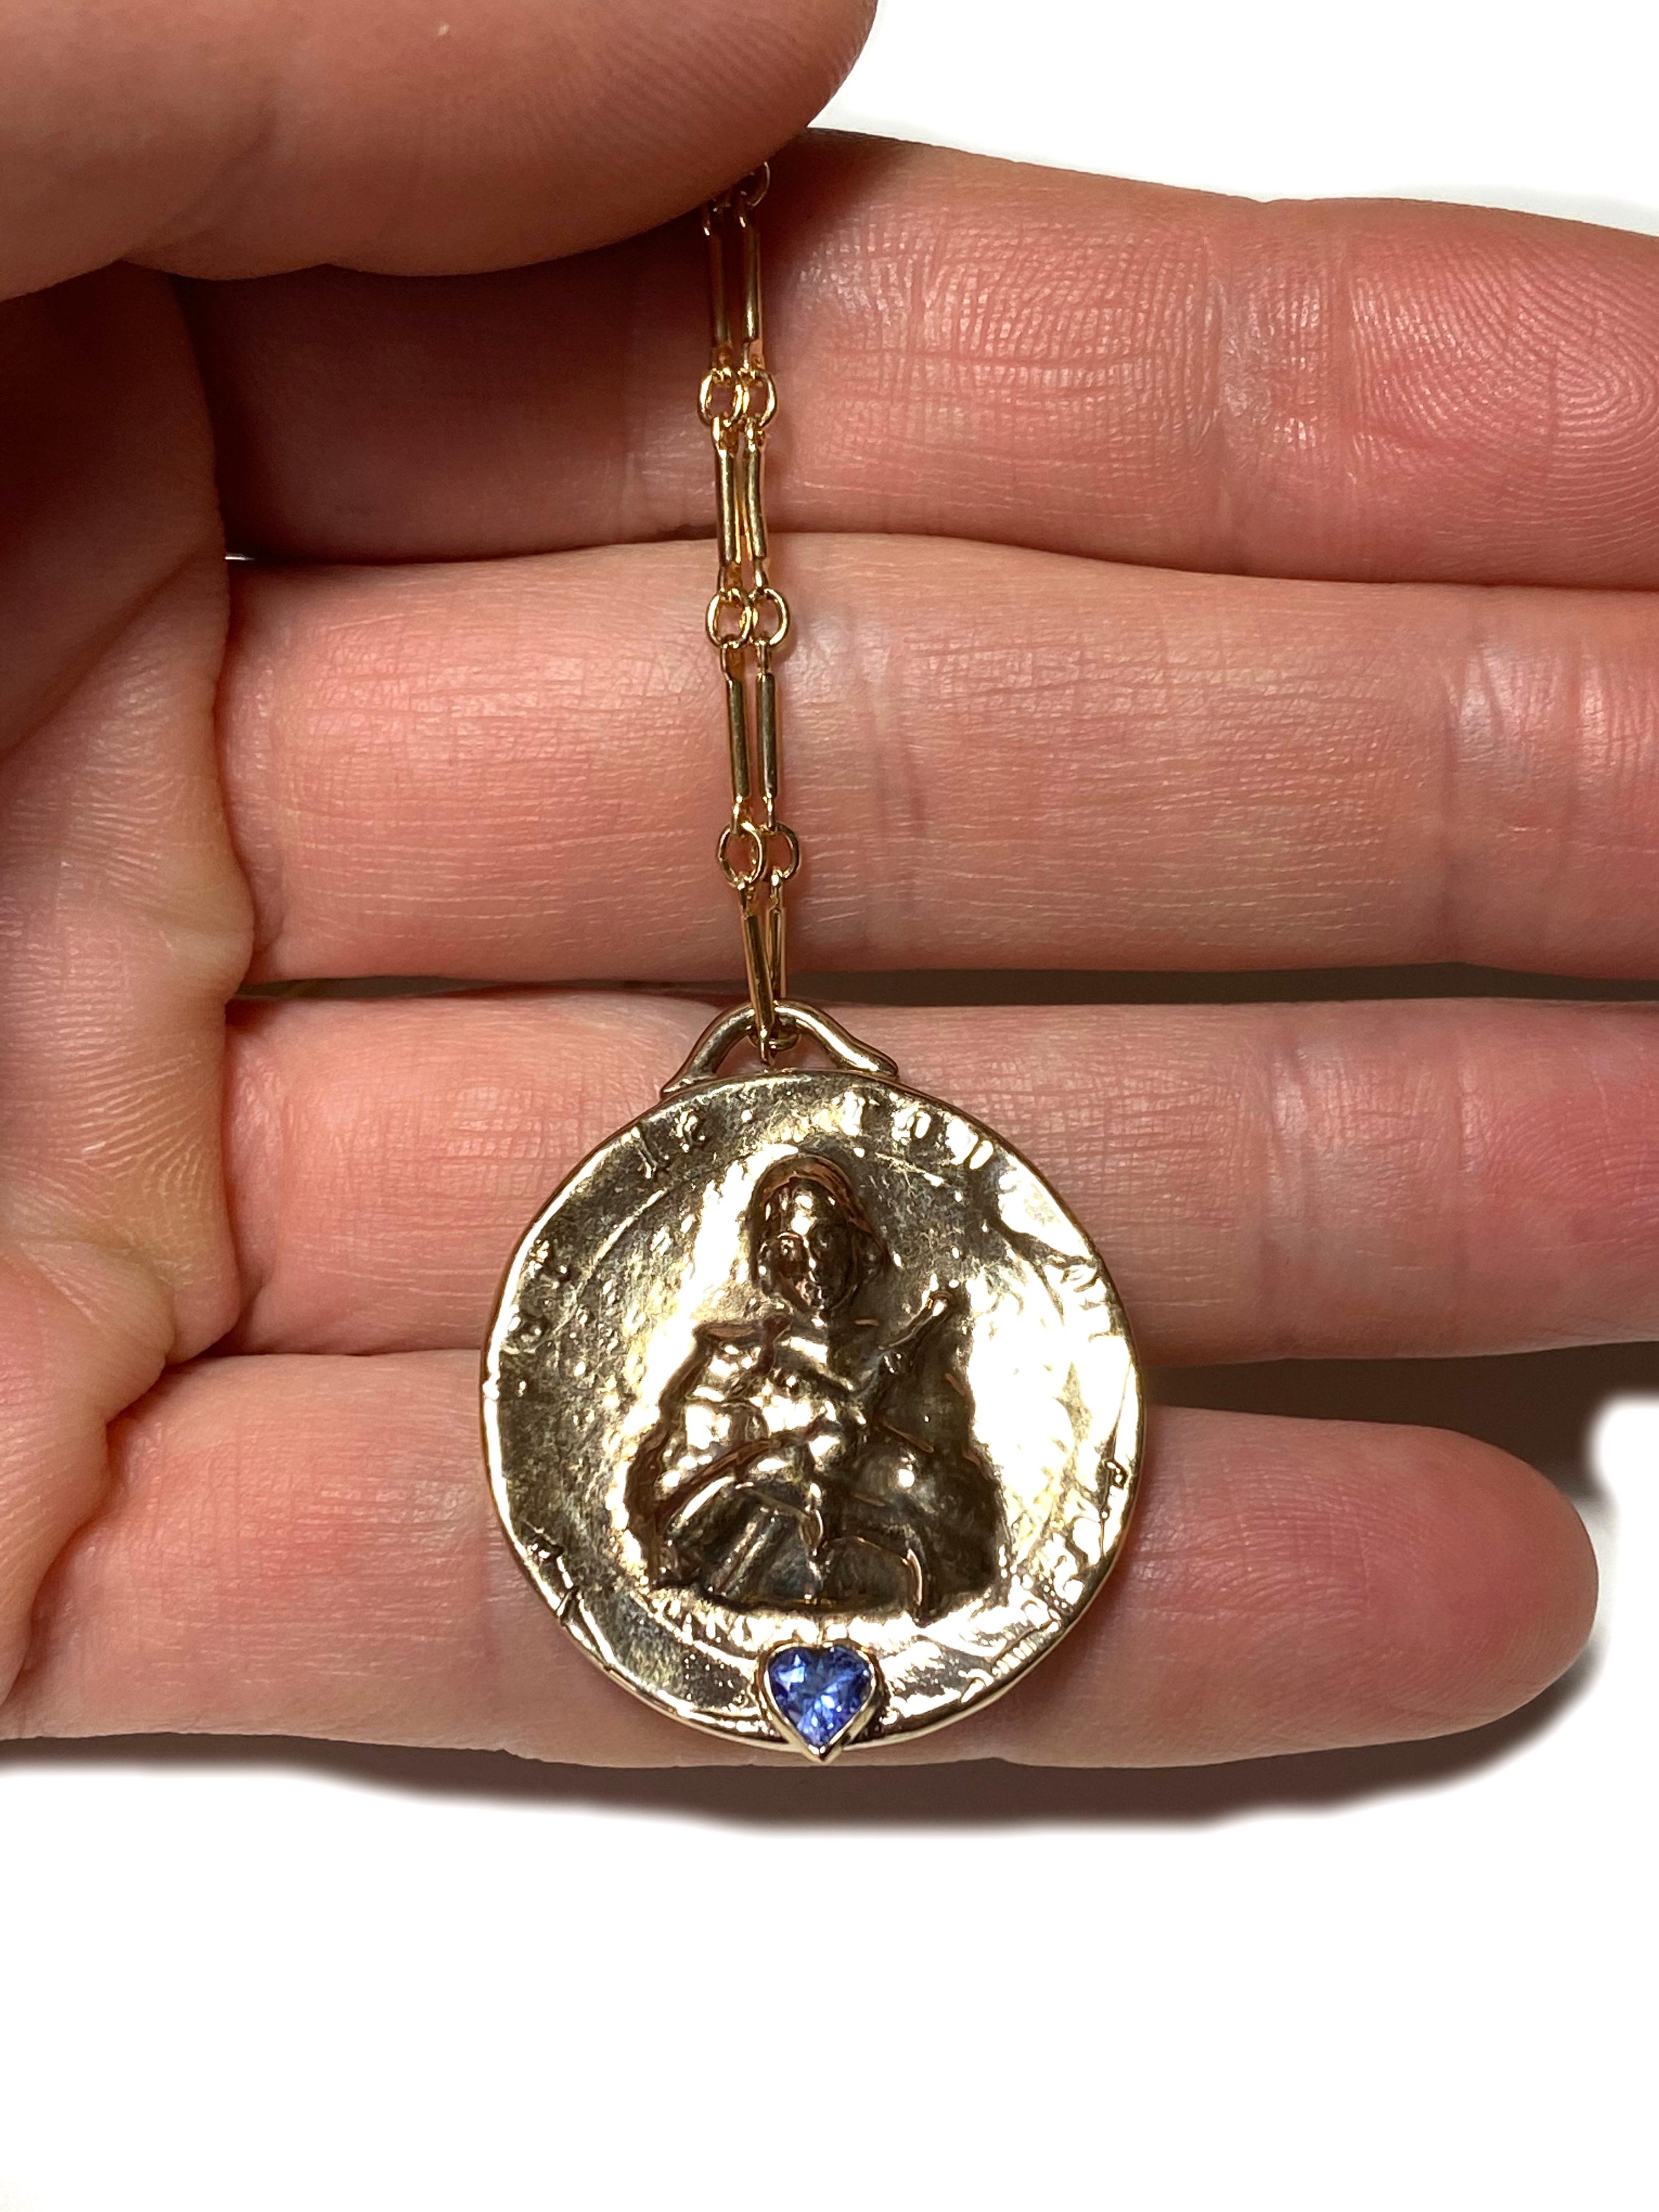 Long Chain Medal Necklace Heart Joan of Arc Coin Tanzanite J Dauphin
Gold-filled Chain Heart Shaped Tanzanite 24